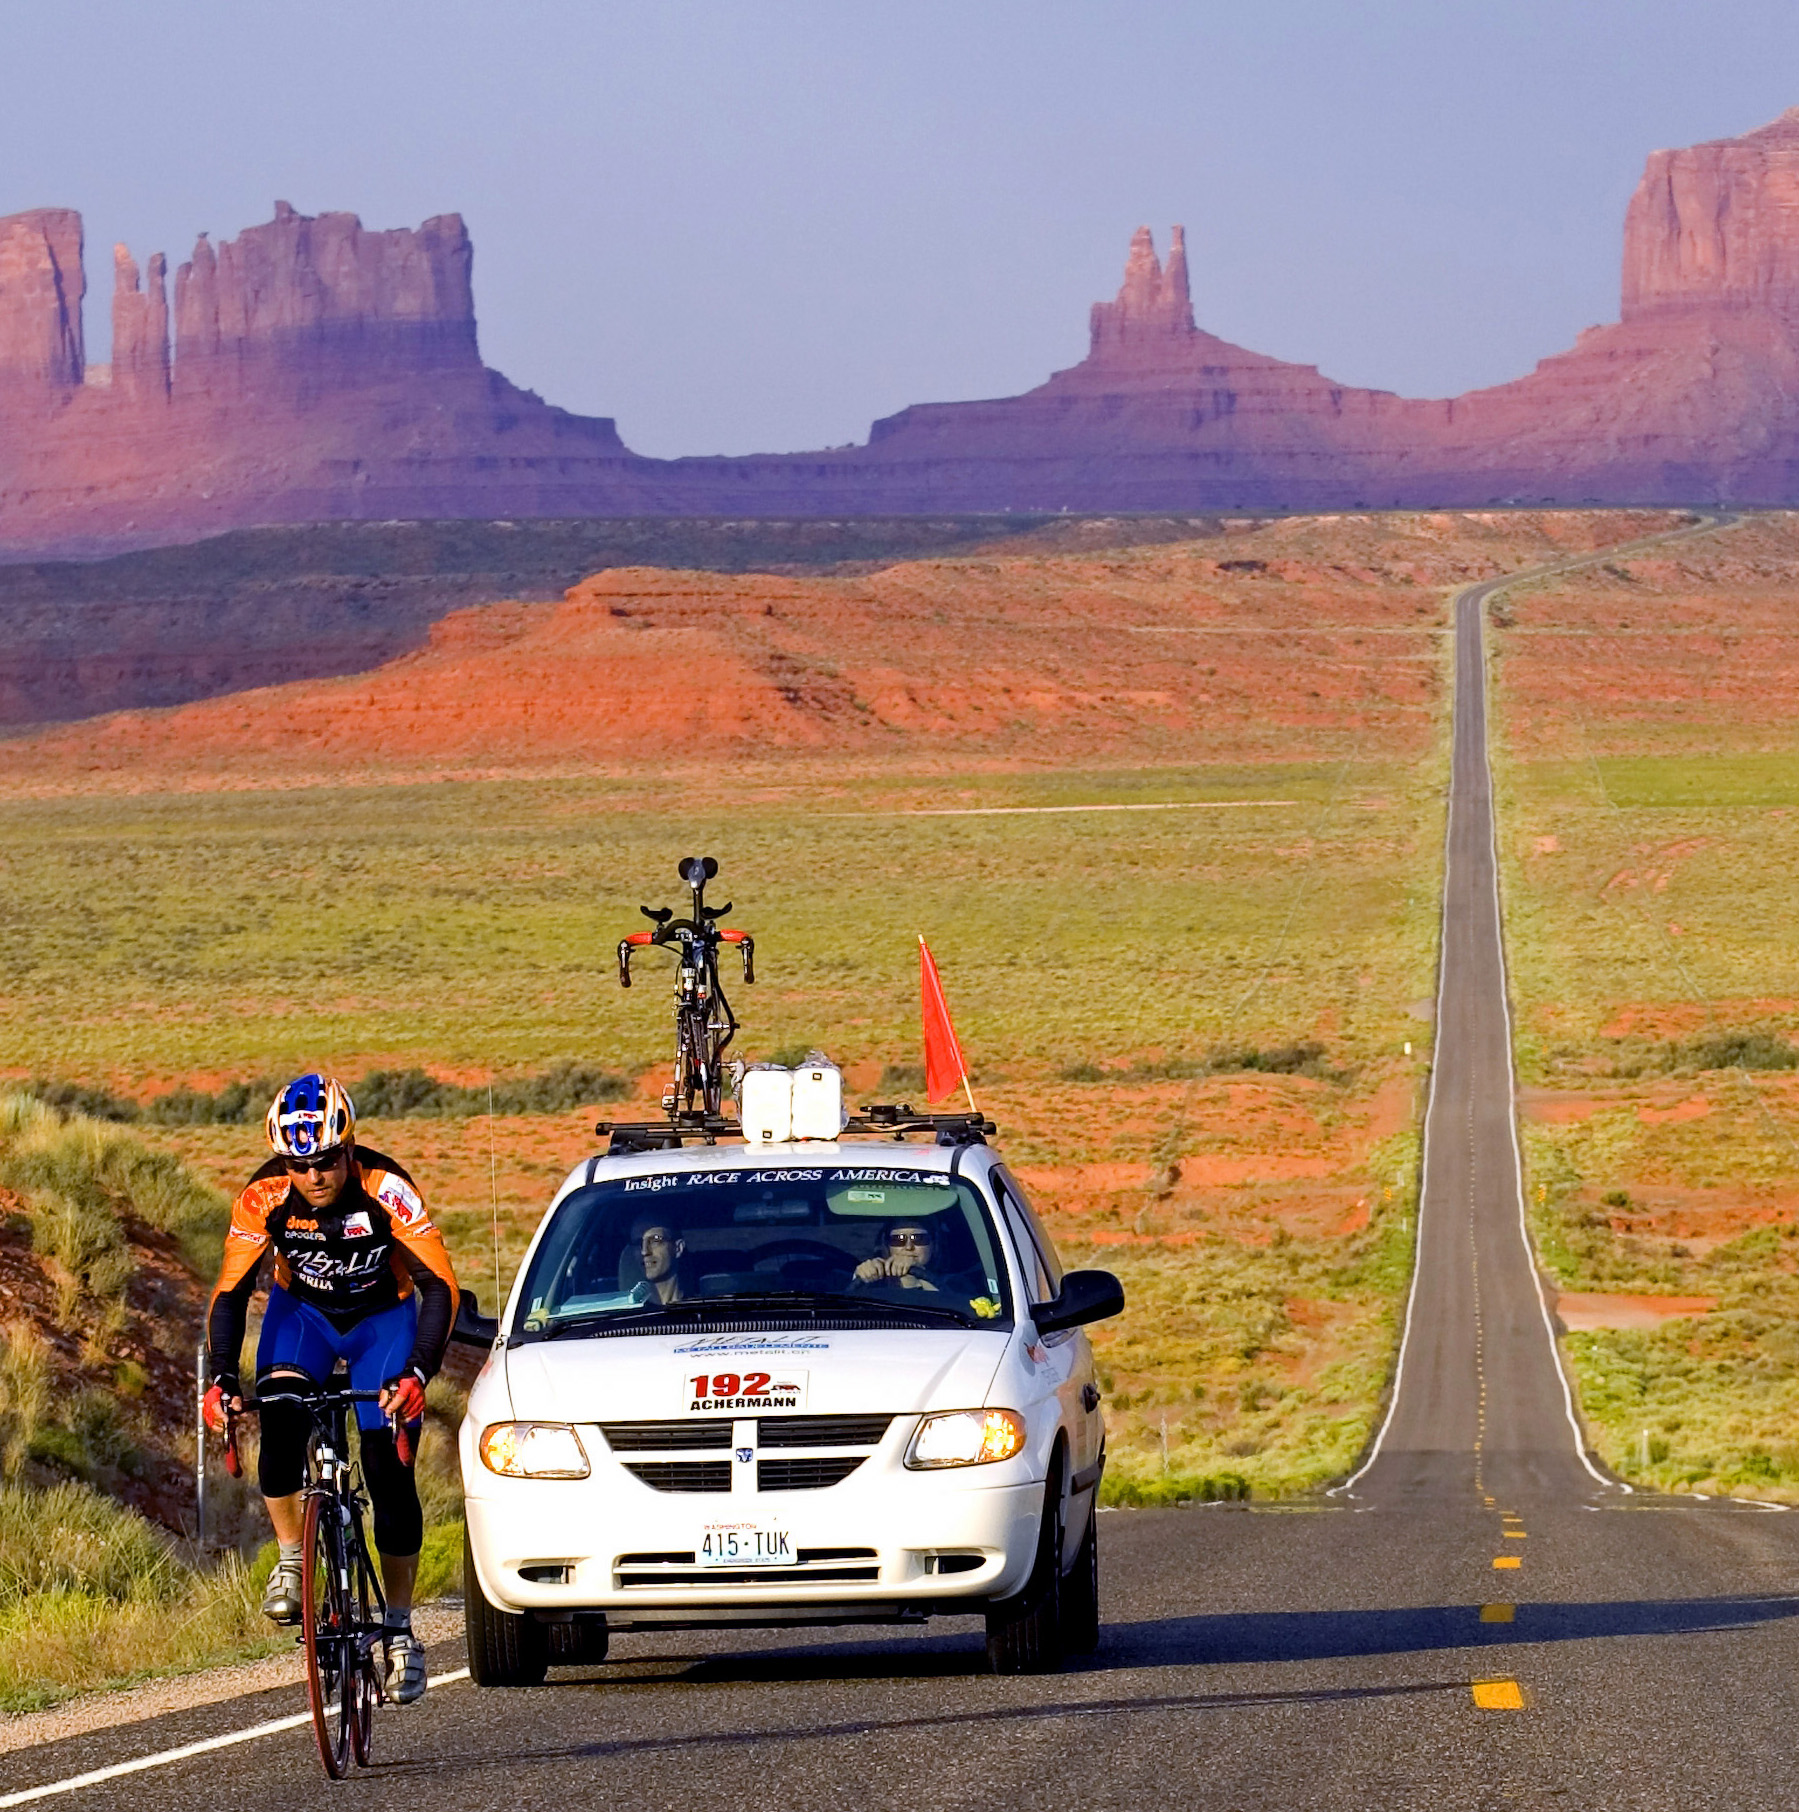 Race Across America documentary on bicycling the country screens at